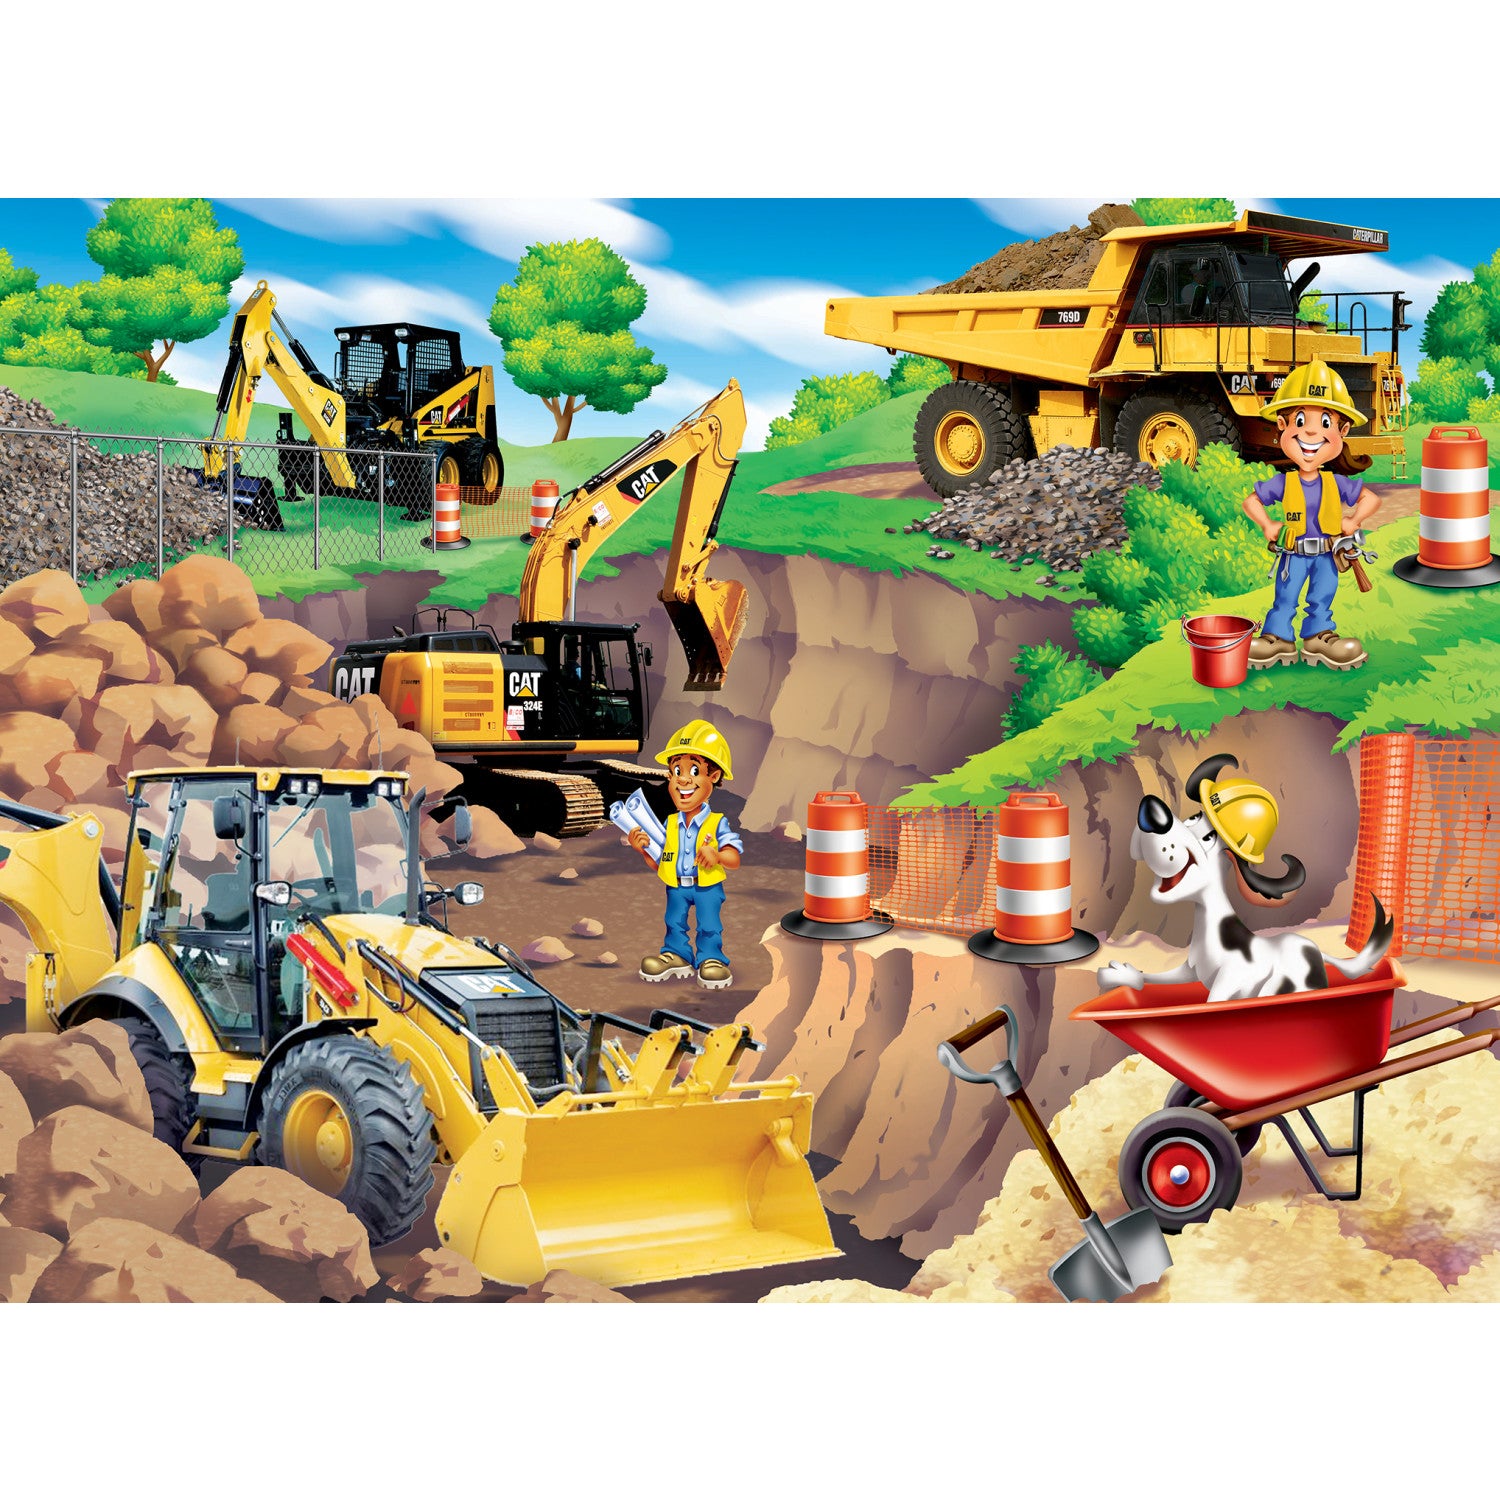 Caterpillar - Day at the Quarry 60 Piece Puzzle